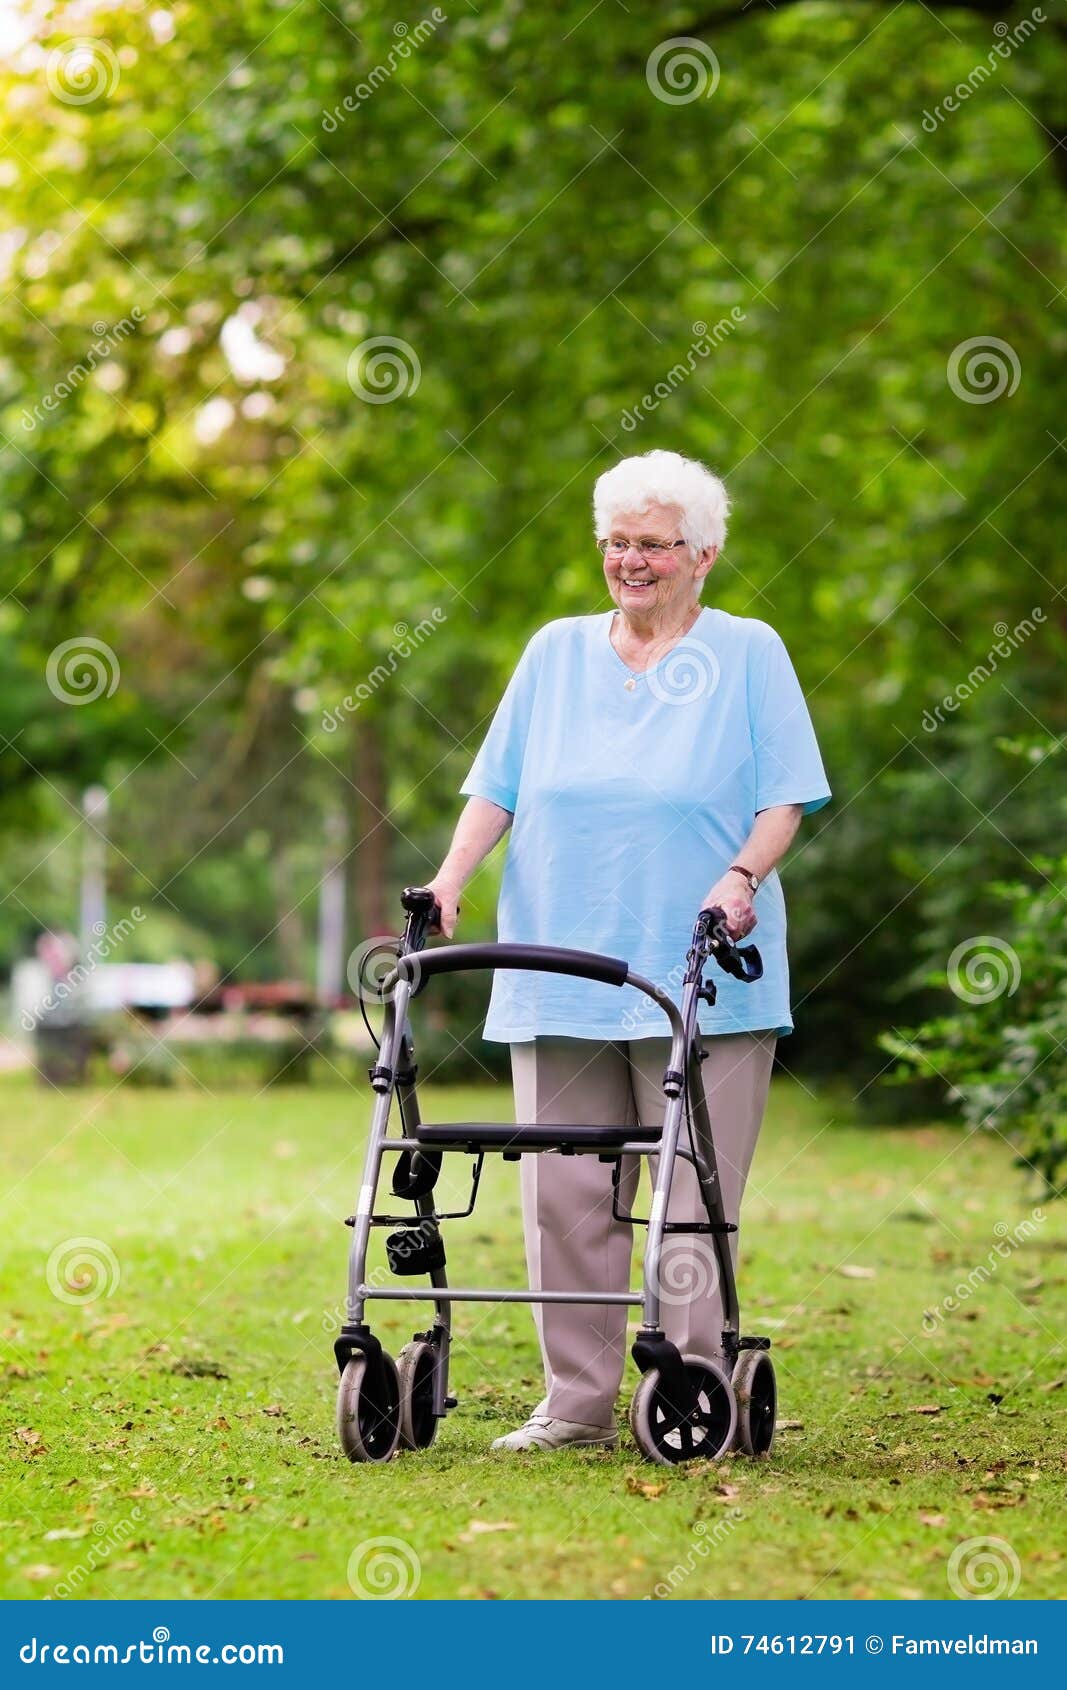 Senior lady with a walker stock image. Image of garden - 74612791